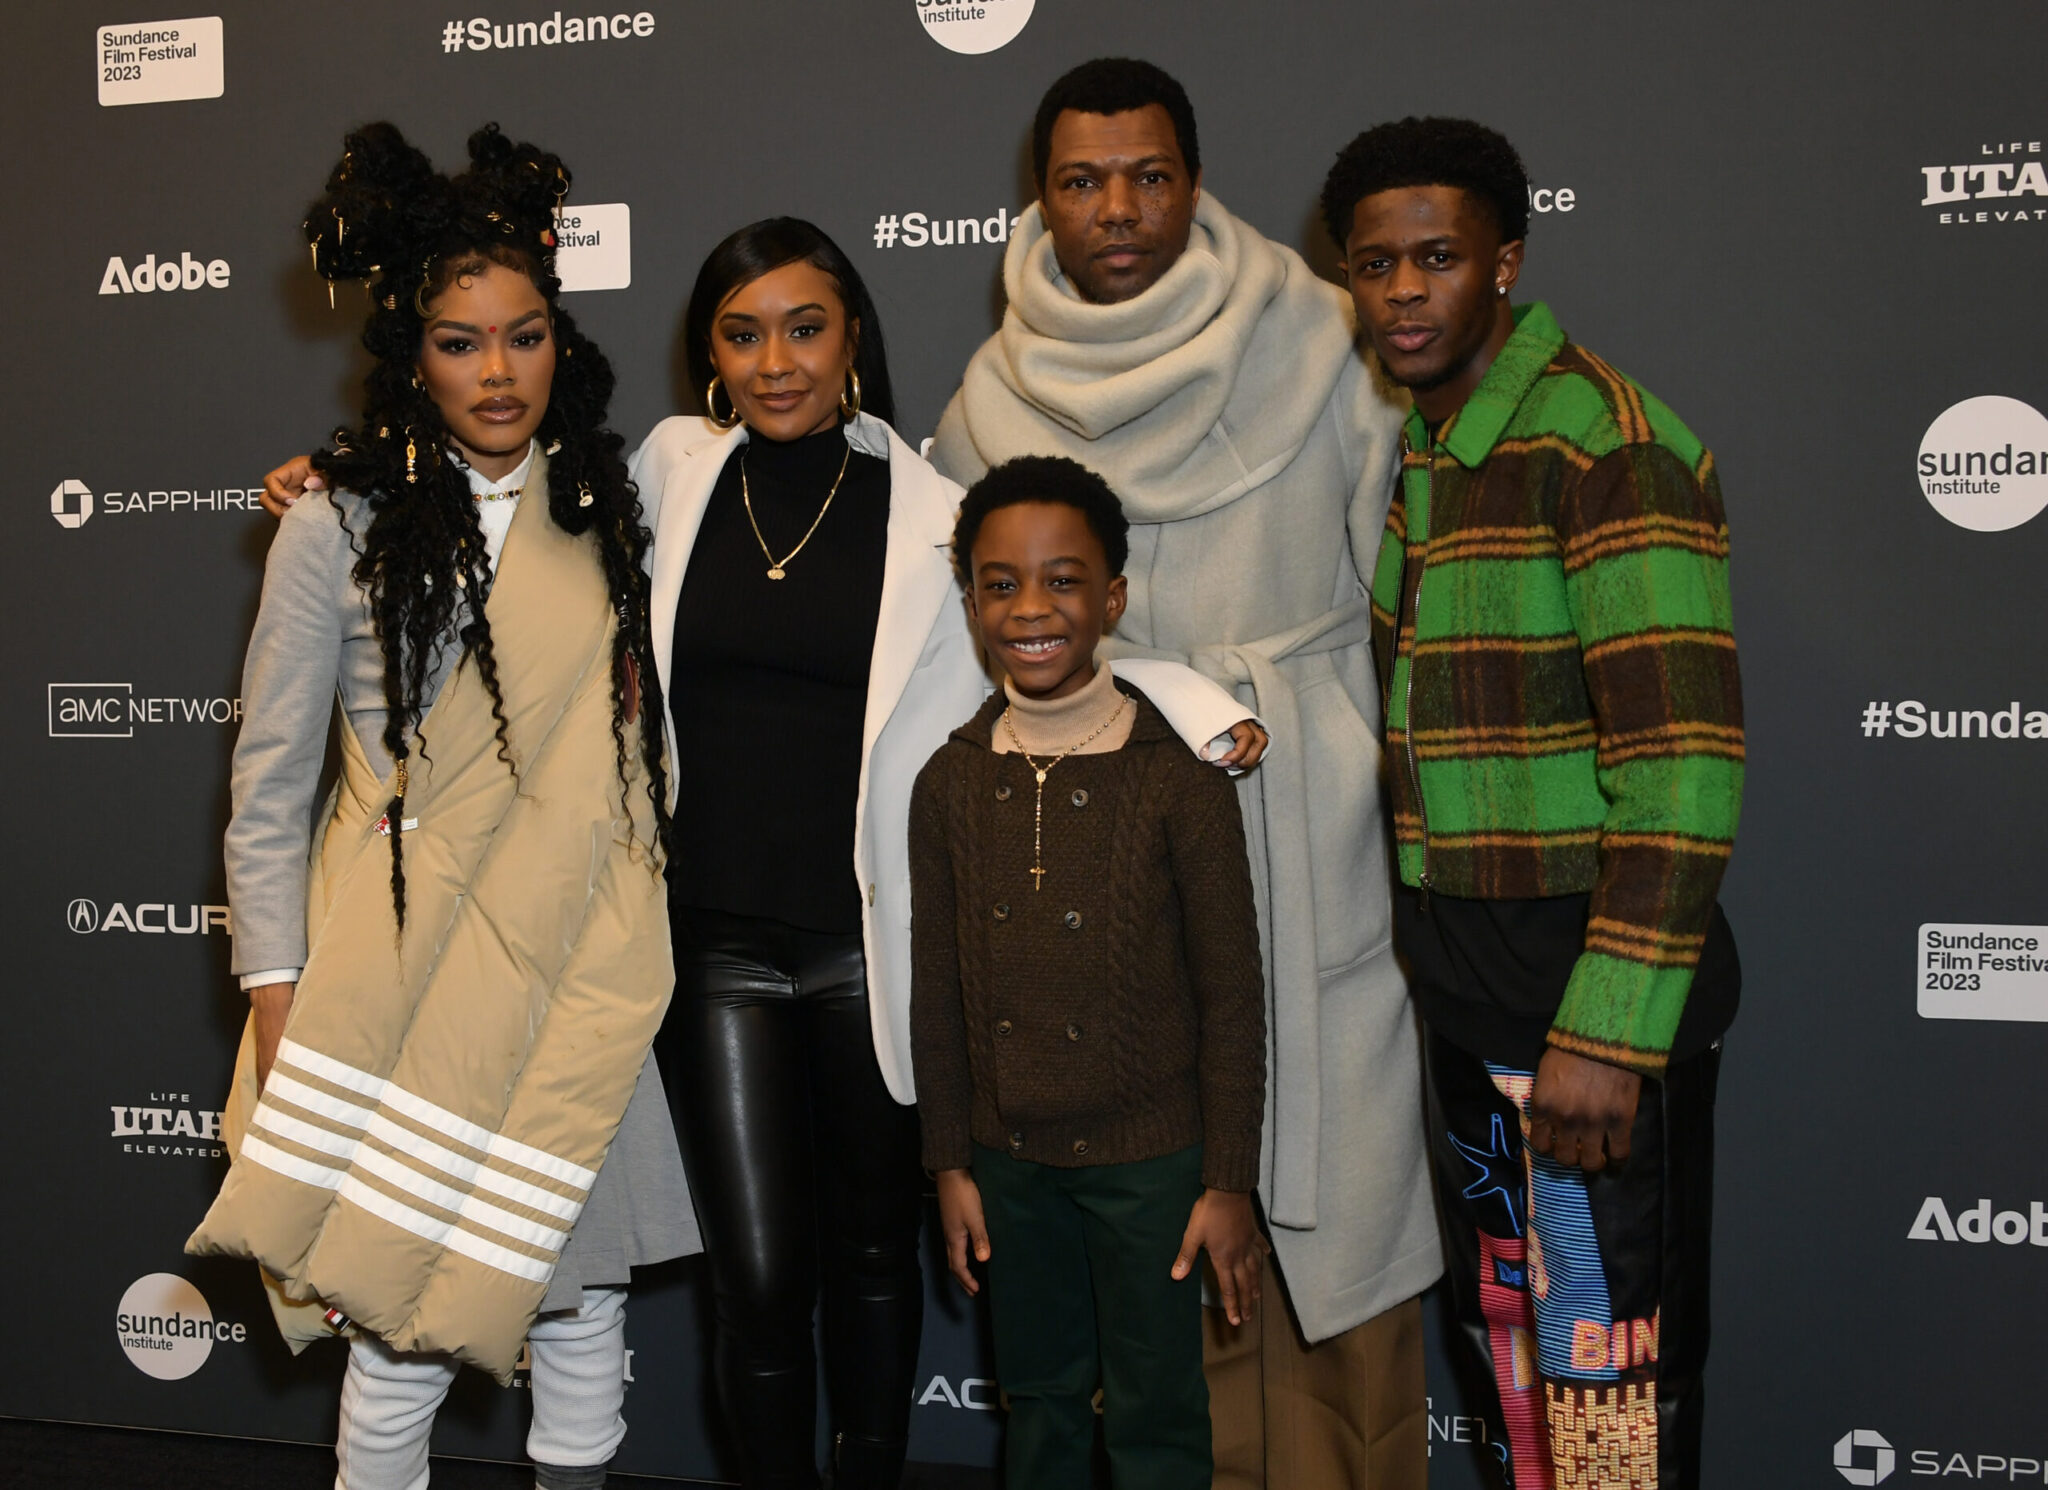 A woman in grey with a beige crossover, a woman in black with a black turleneck, a little boy in a brown sweater, a man with black hair in a grey poncho, and a man in a green and brown striped jacket, all stand in front of a step and repeat at the 2023 Sundance Film Festival